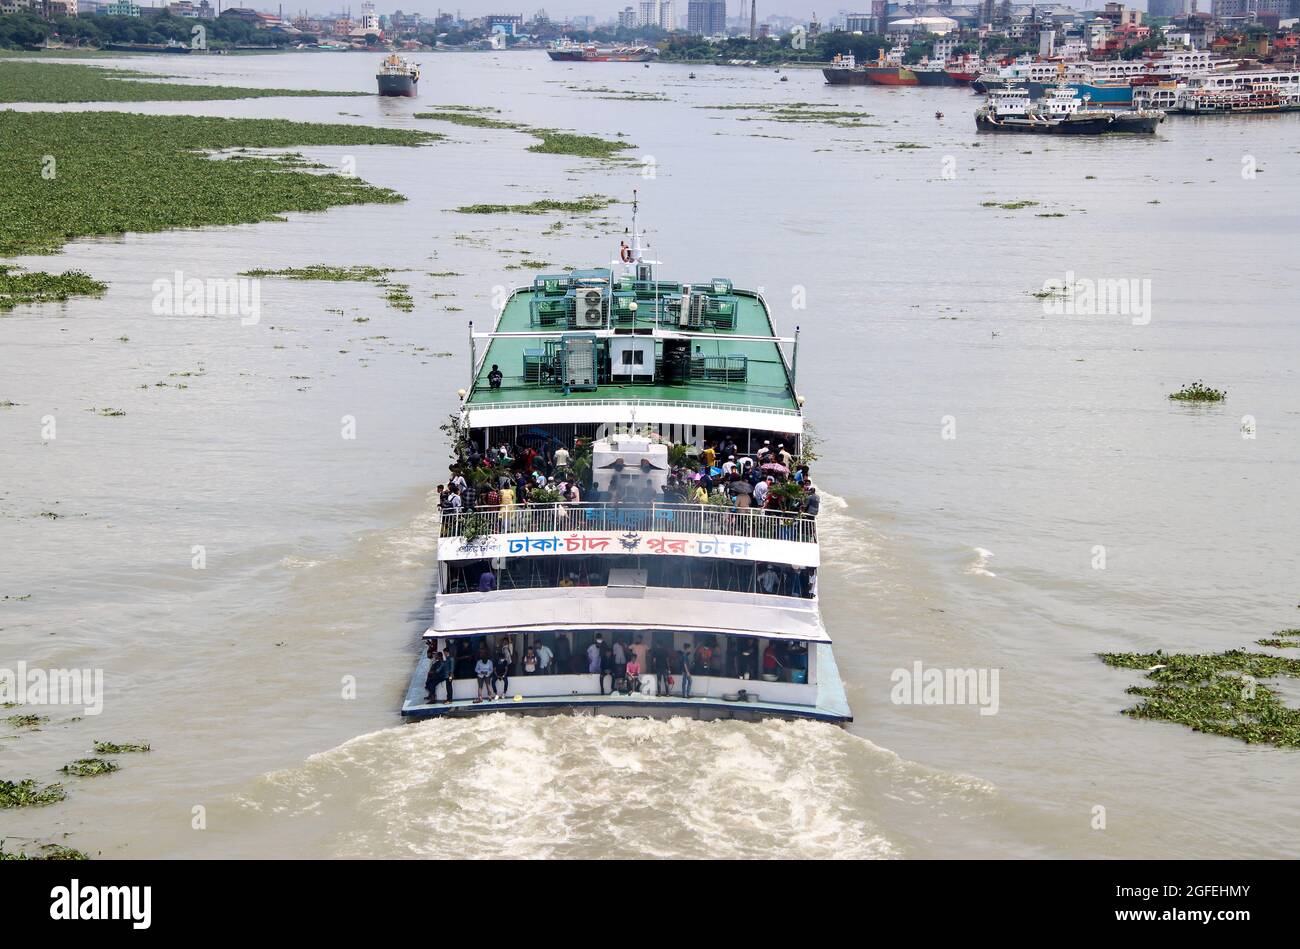 Dhaka, Bangladesh : People returning to their home by overcrowded passenger ferry on the occasion of Eid al-Adha Stock Photo